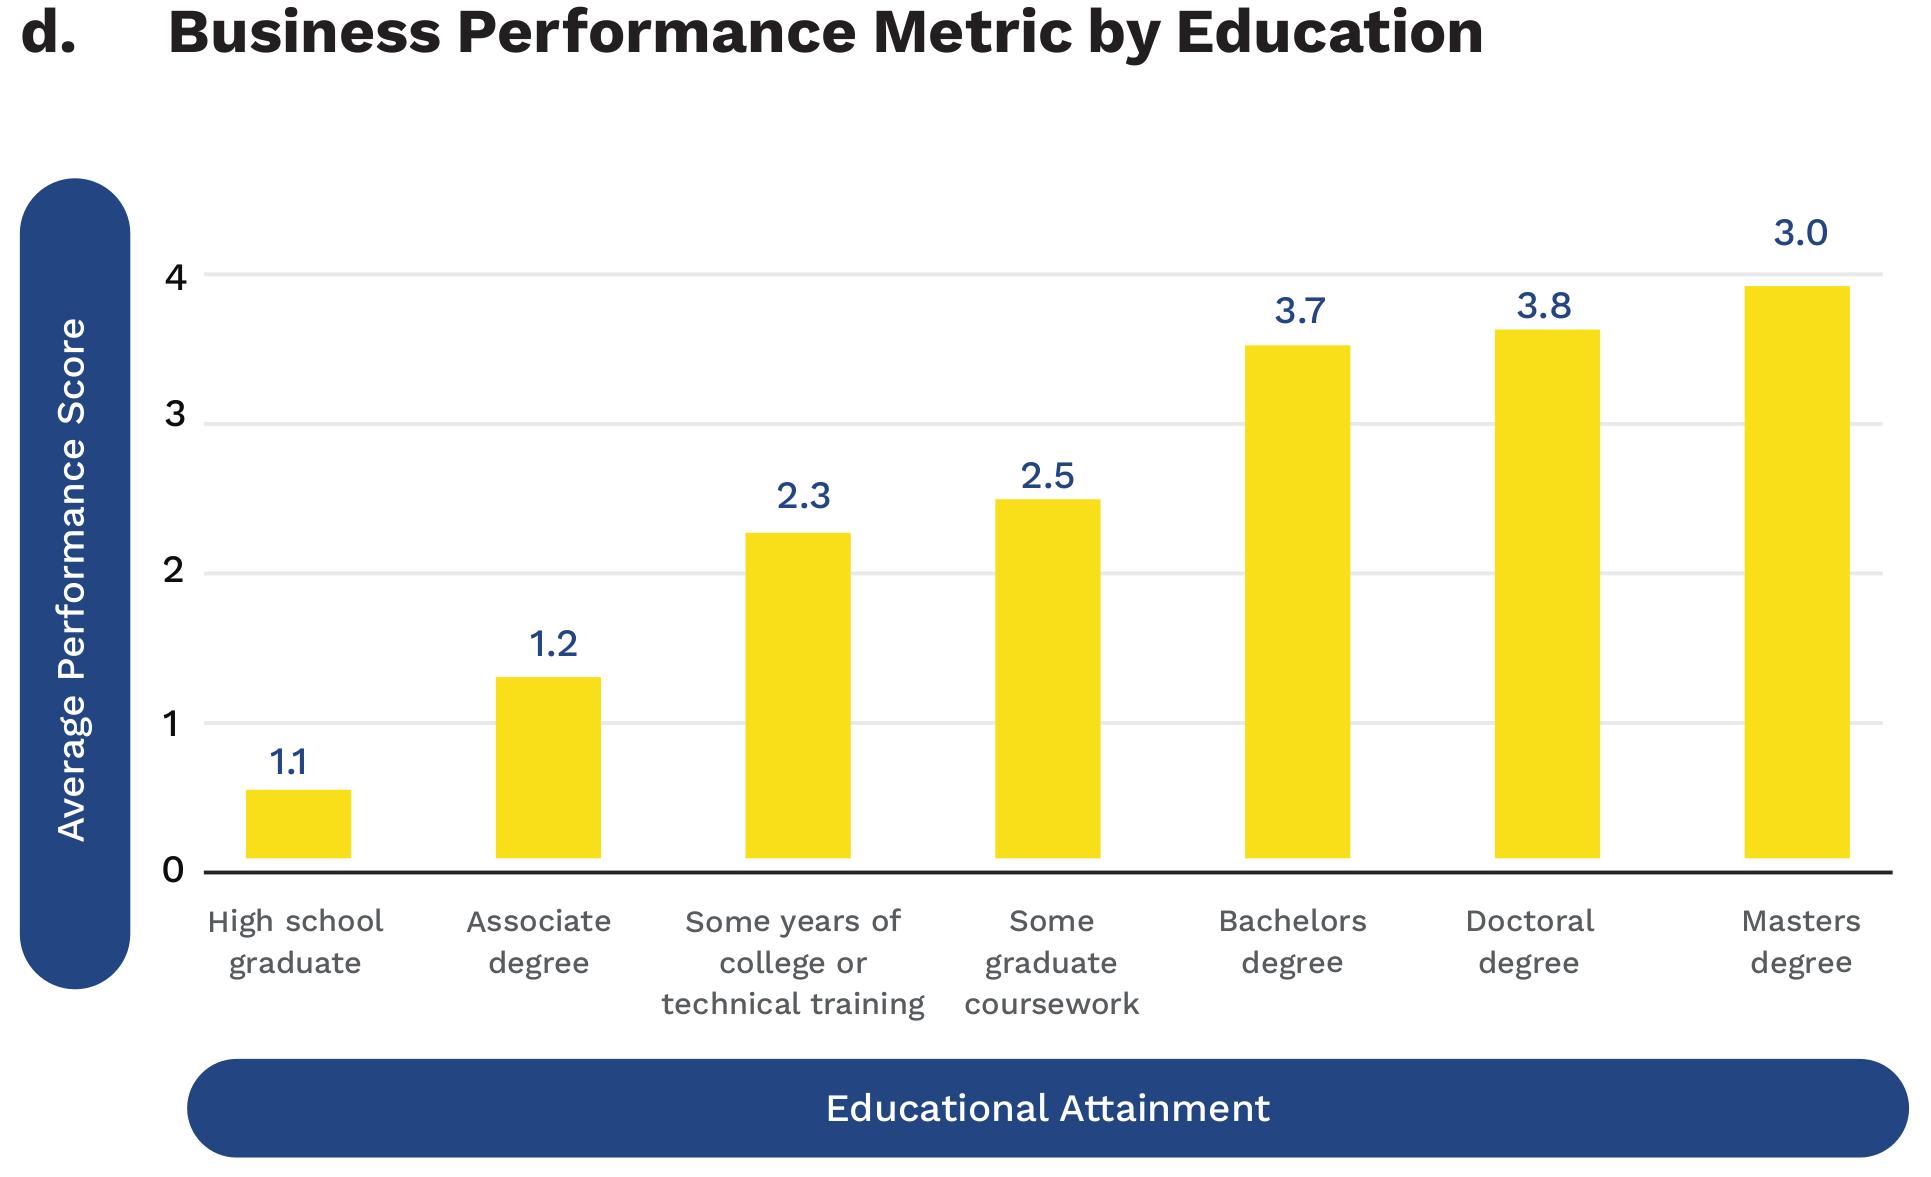 Business Performance Metric by Education